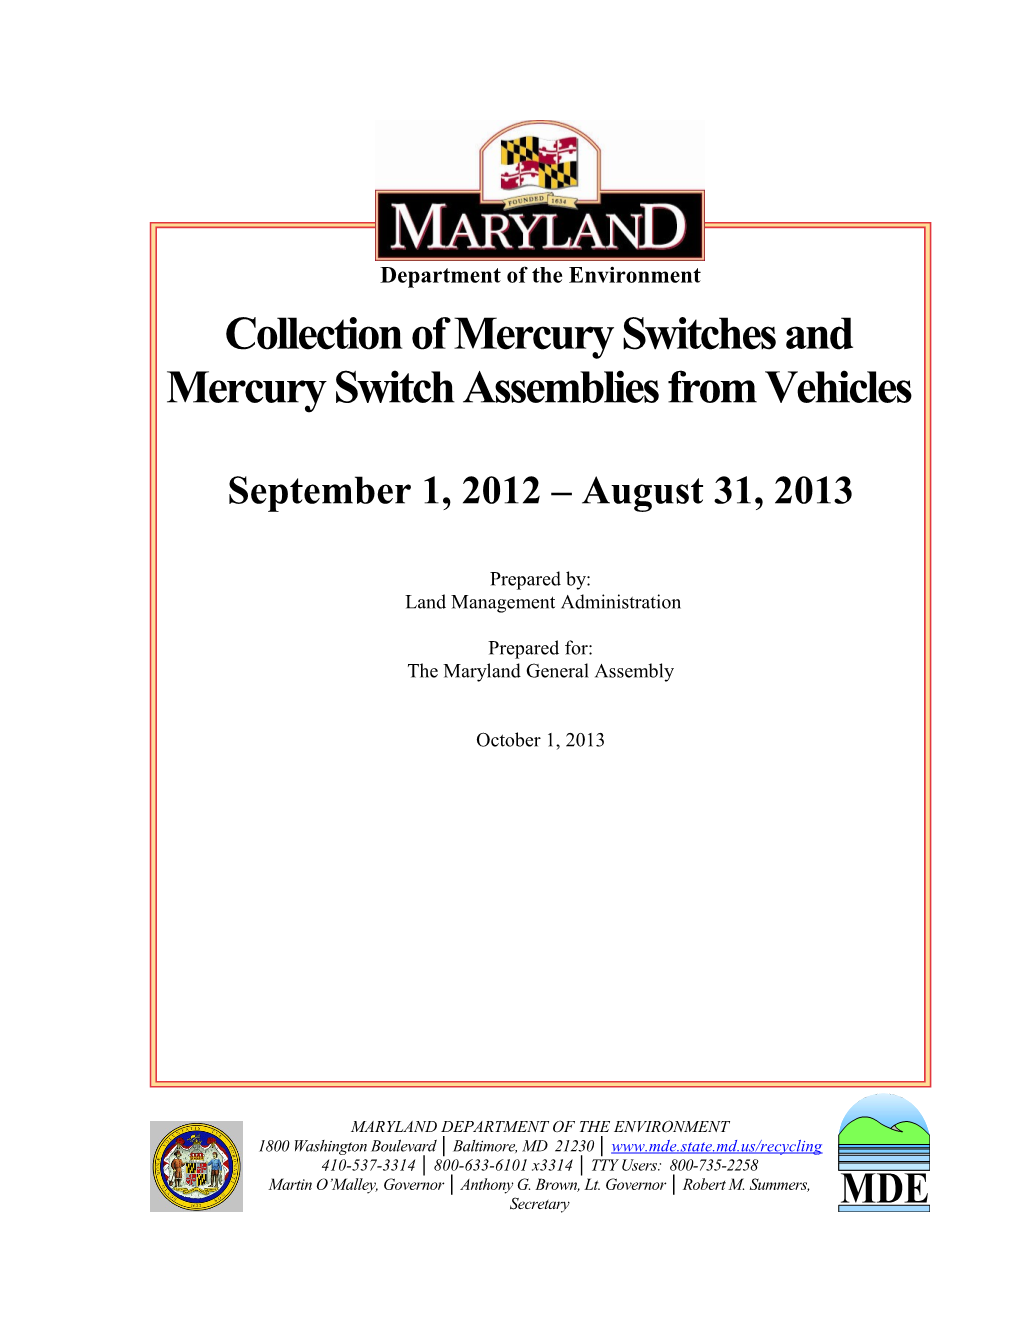 Collection of Mercury Switches and Mercury Switch Assemblies from Vehicles